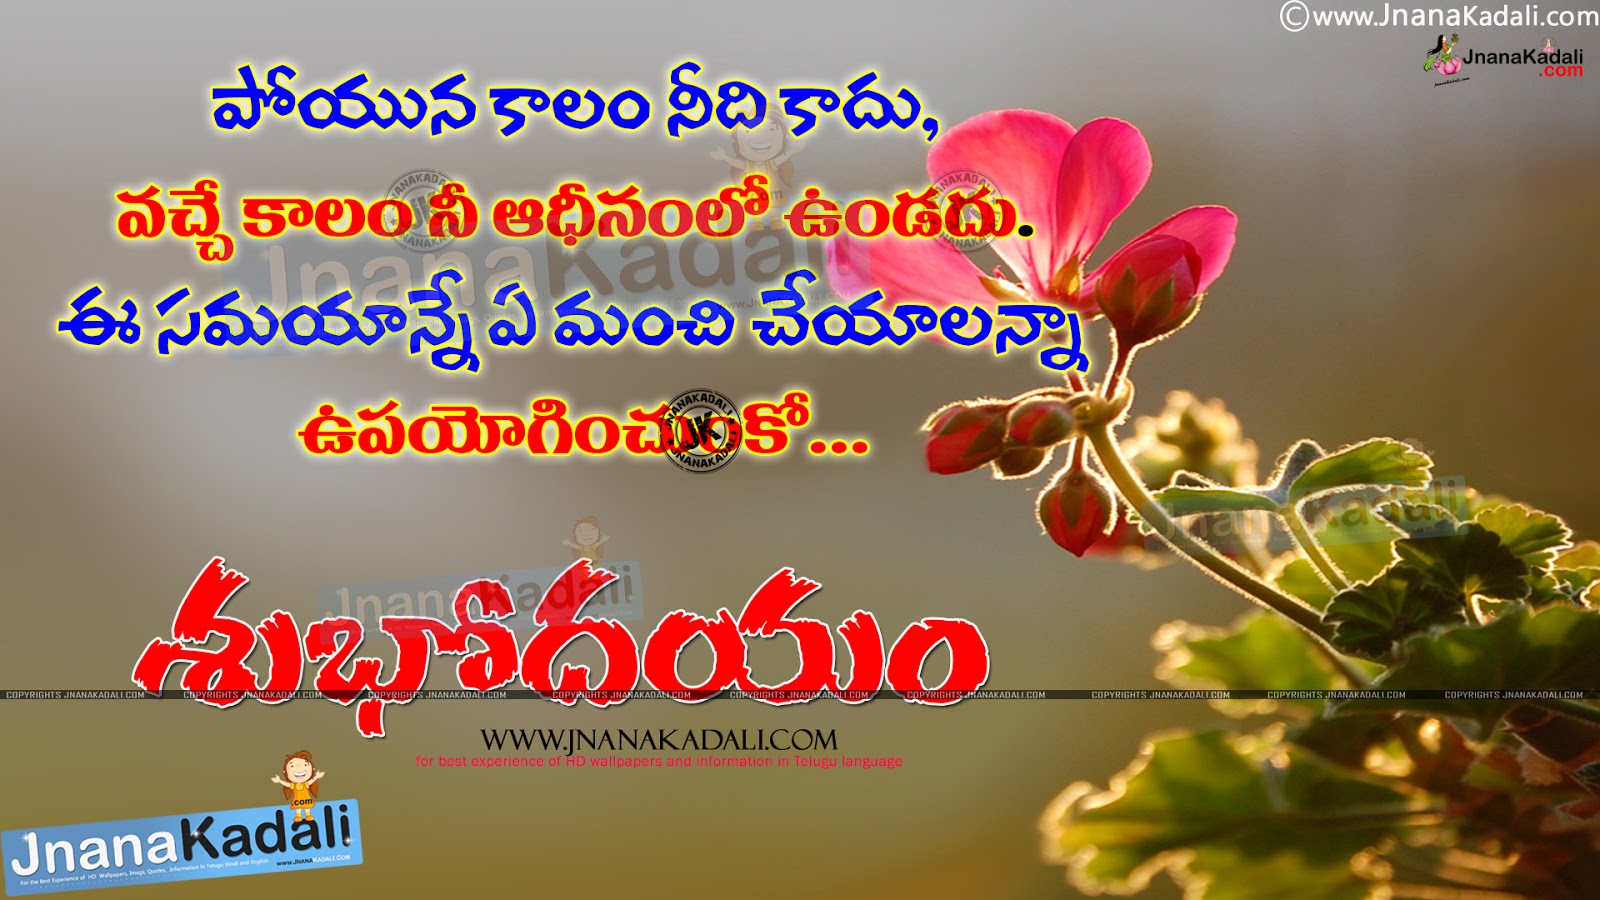 Telugu Inspirational Quotations with Good Morning Greetings Wallpapers ...